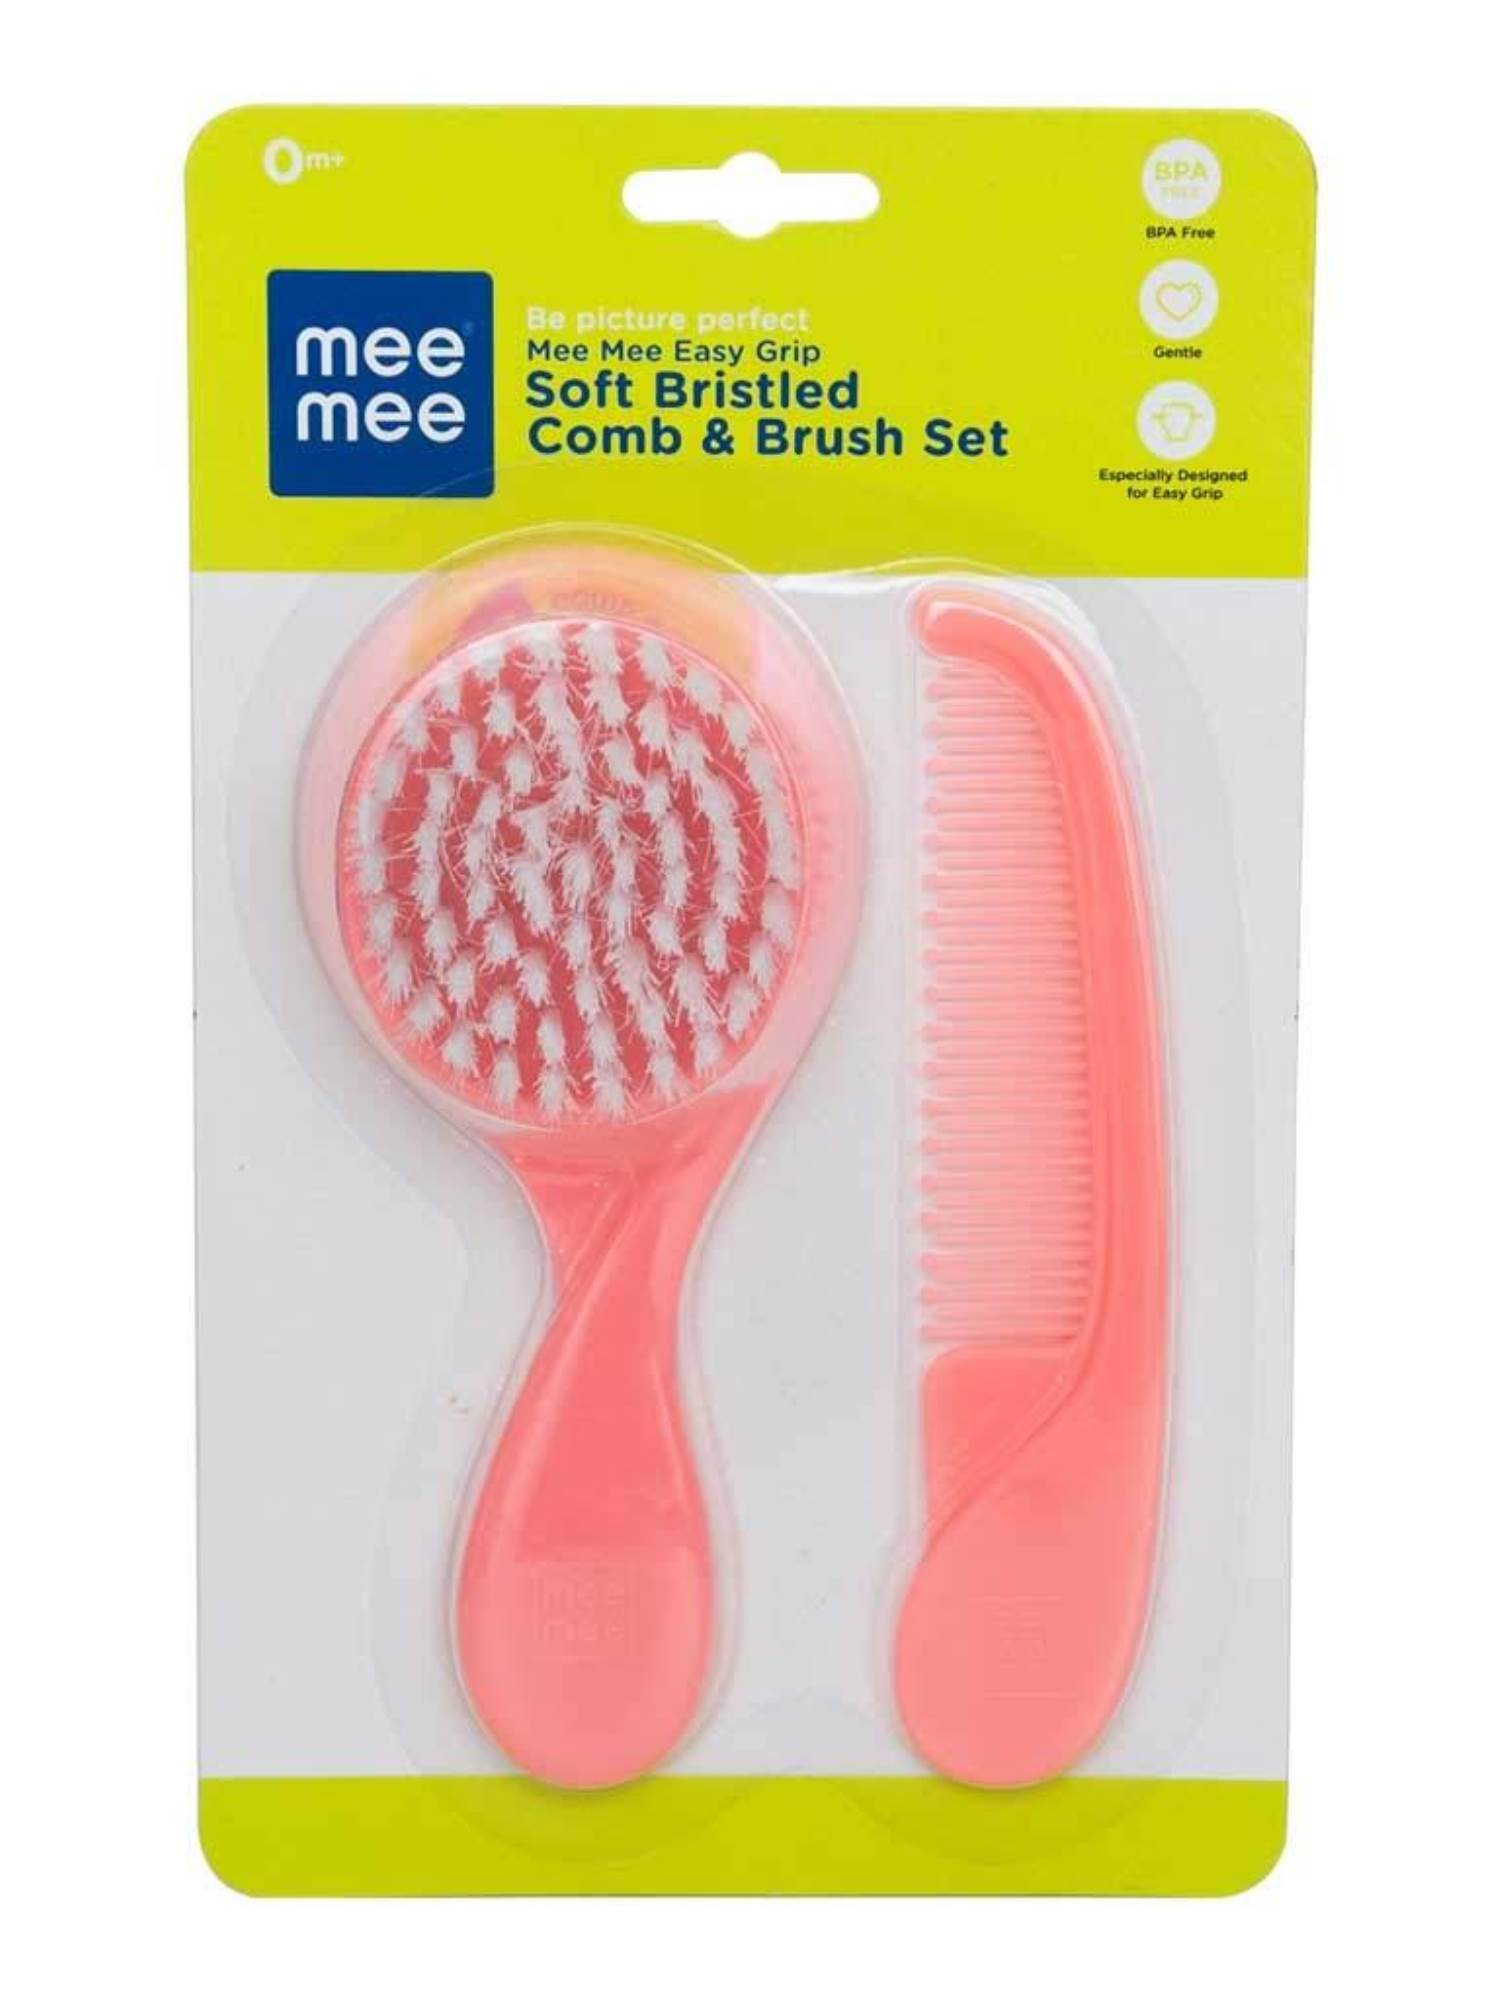 Mee Mee Easy Grip Soft Bristled Comb & Brush Set (Blue) :: SMILE BABY